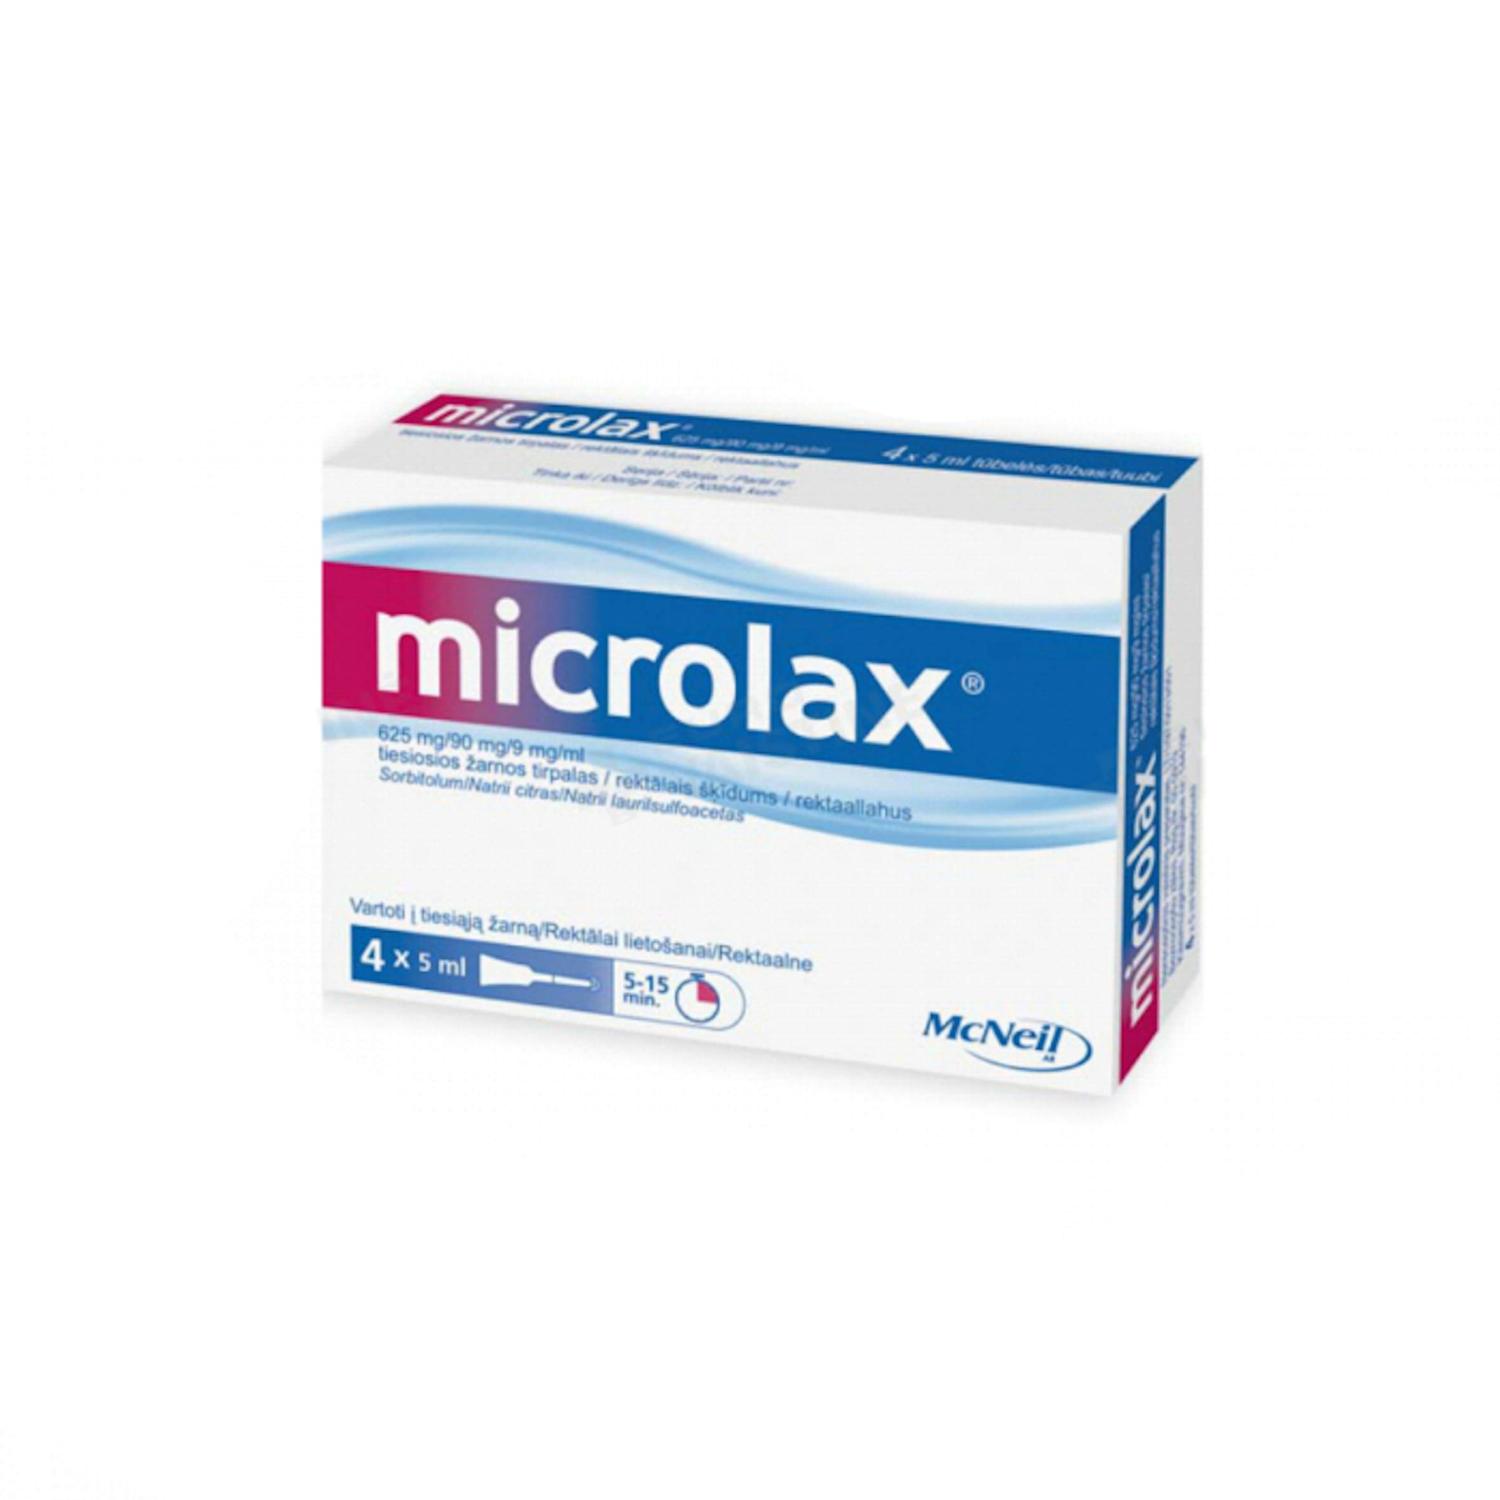 Microlax Enema 5mlx4 Fast Treatment Of Constipation Or Conditions Requiring Relief Of Emptying 3357